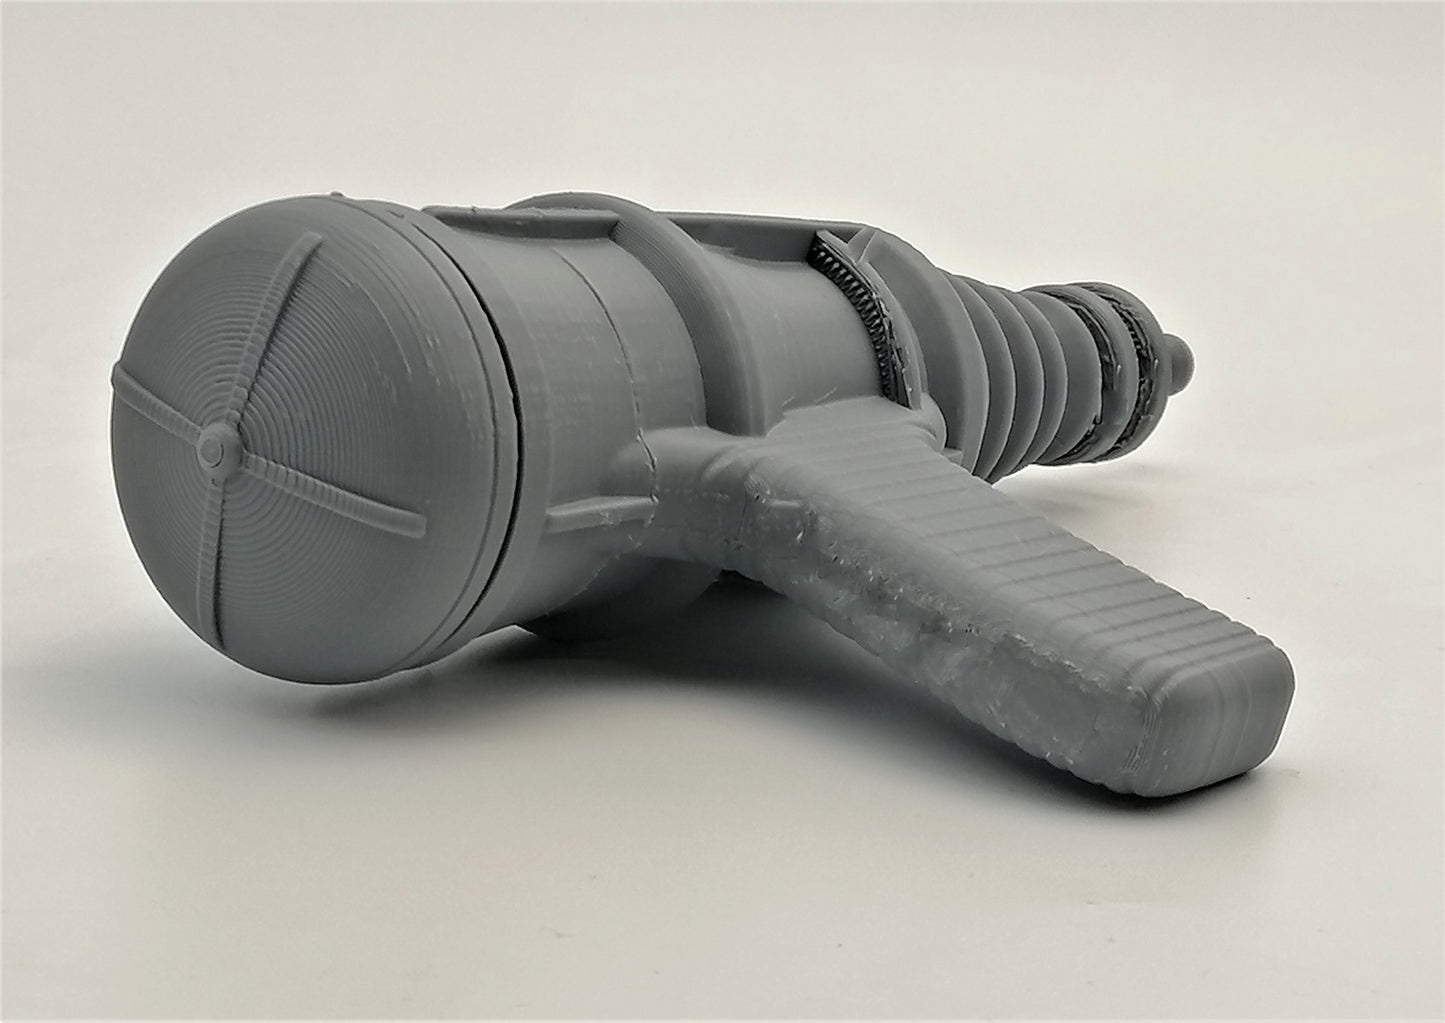 The Illuminating Blaster from Forbidden Planet - Sci-fi Replica Prop - 3D Printed